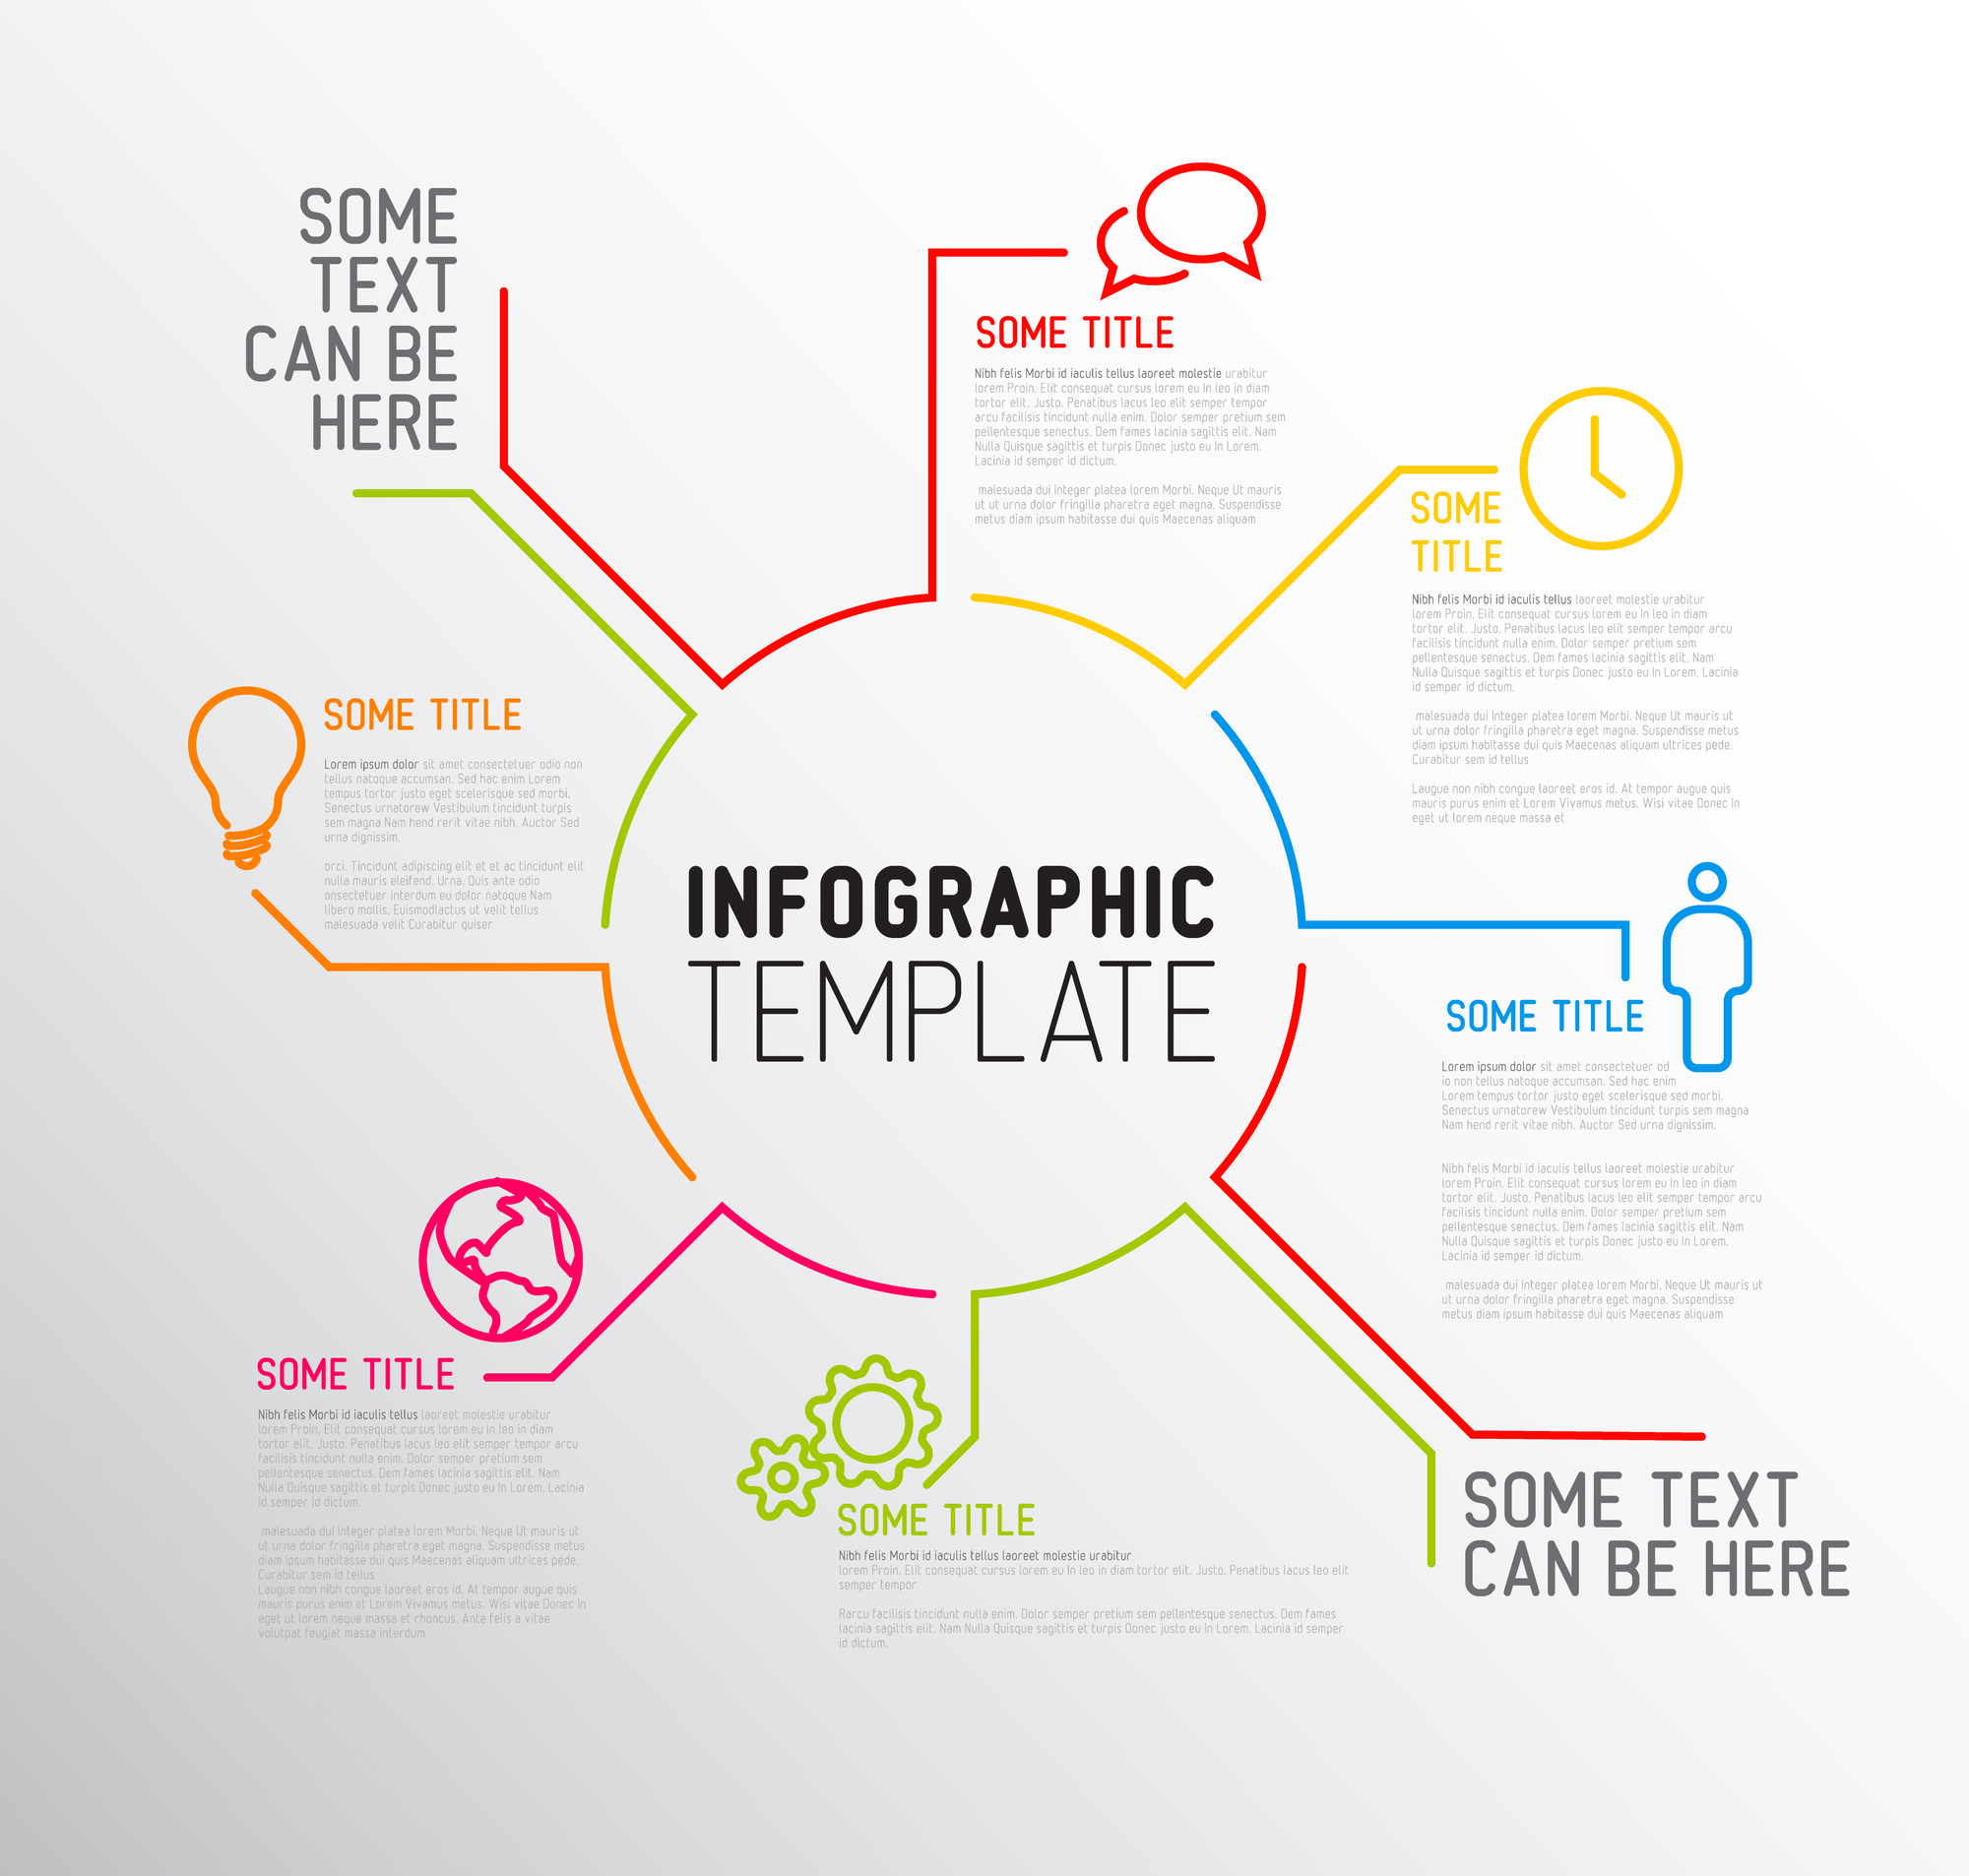 50 Free Timeline Infographic Templates: Amazing Free Collection